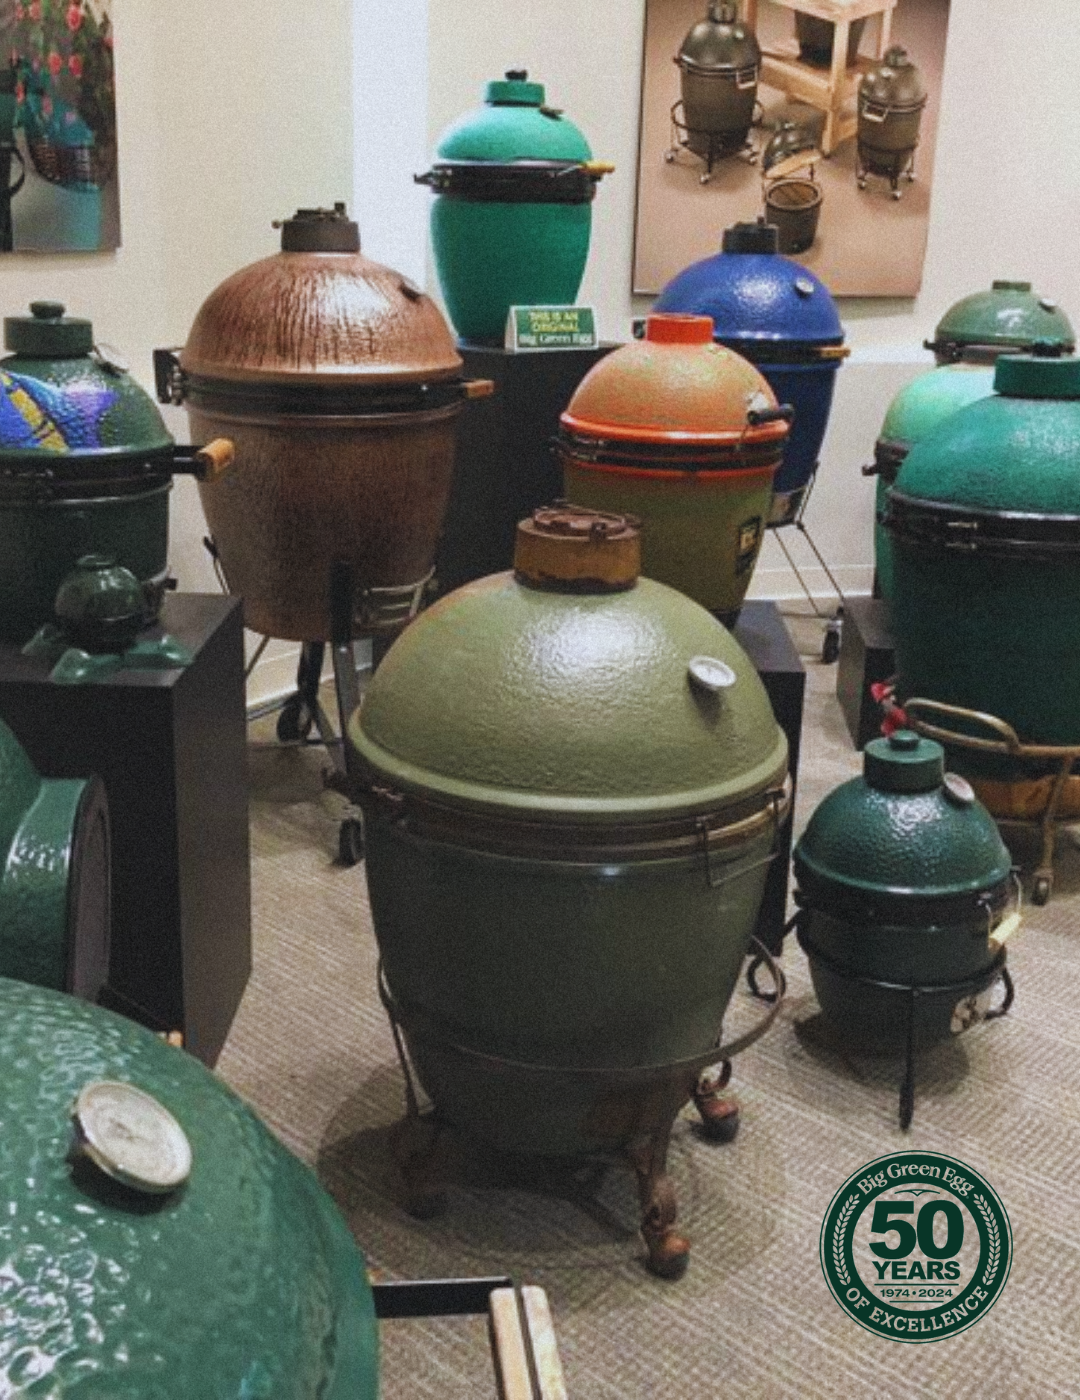 About Big Green EGG